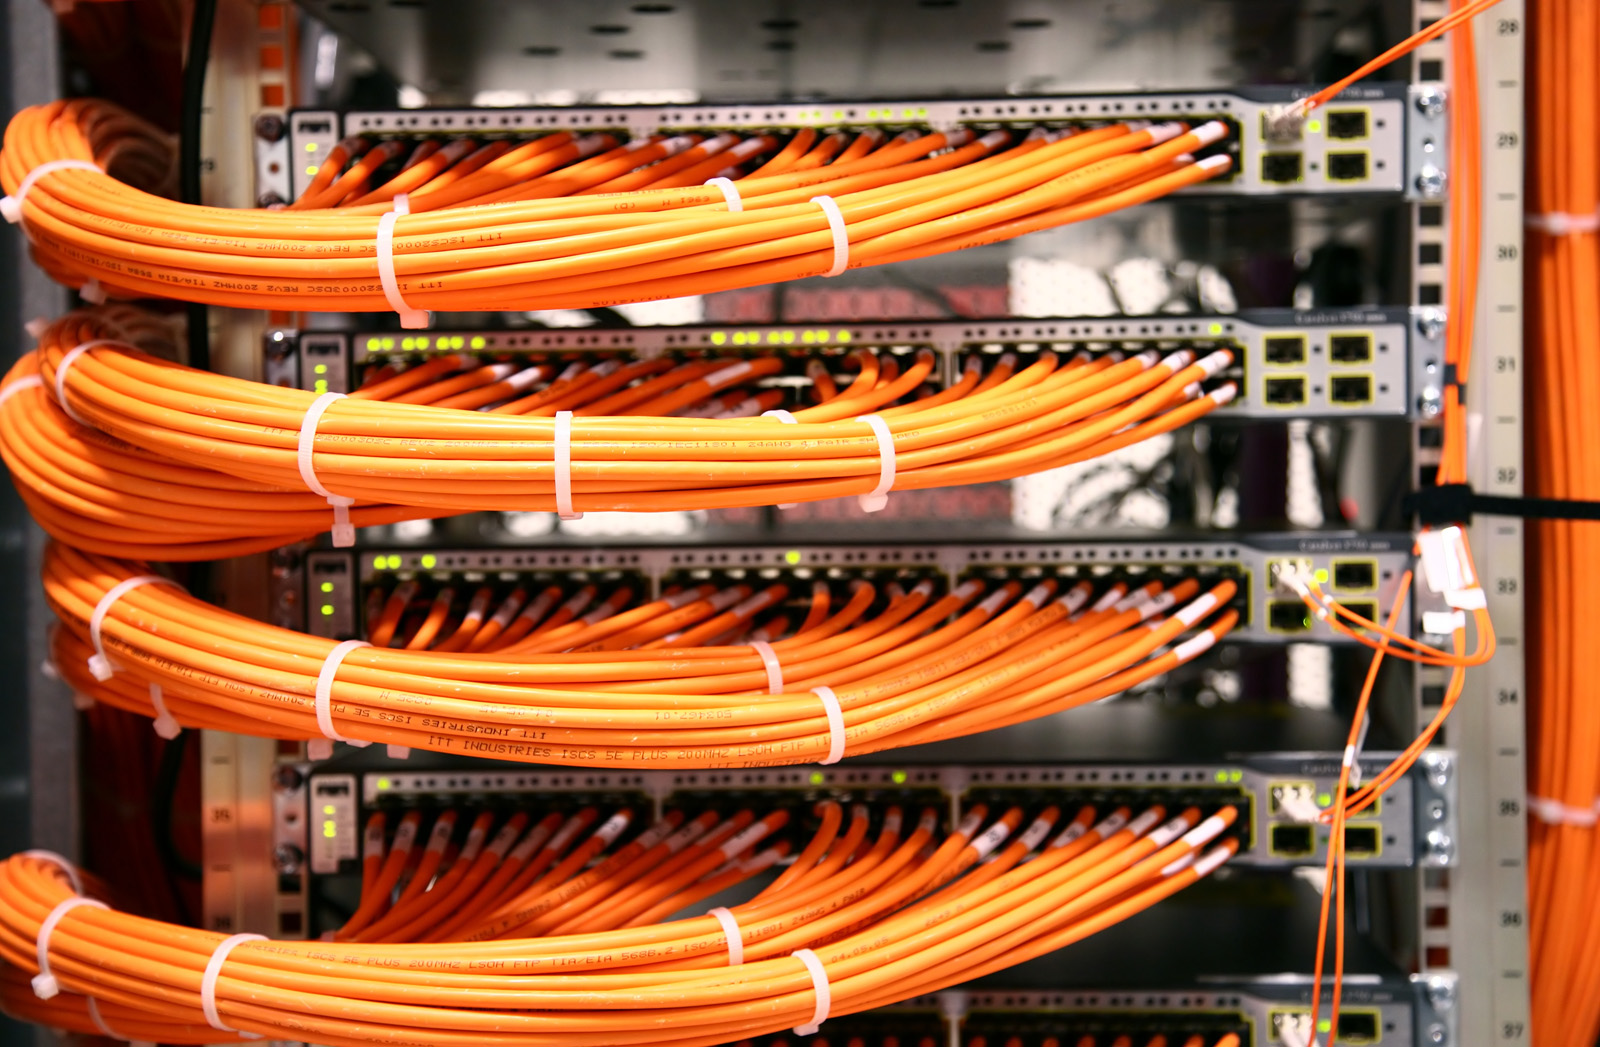 Owensboro Kentucky Premier Voice & Data Network Cabling Solutions